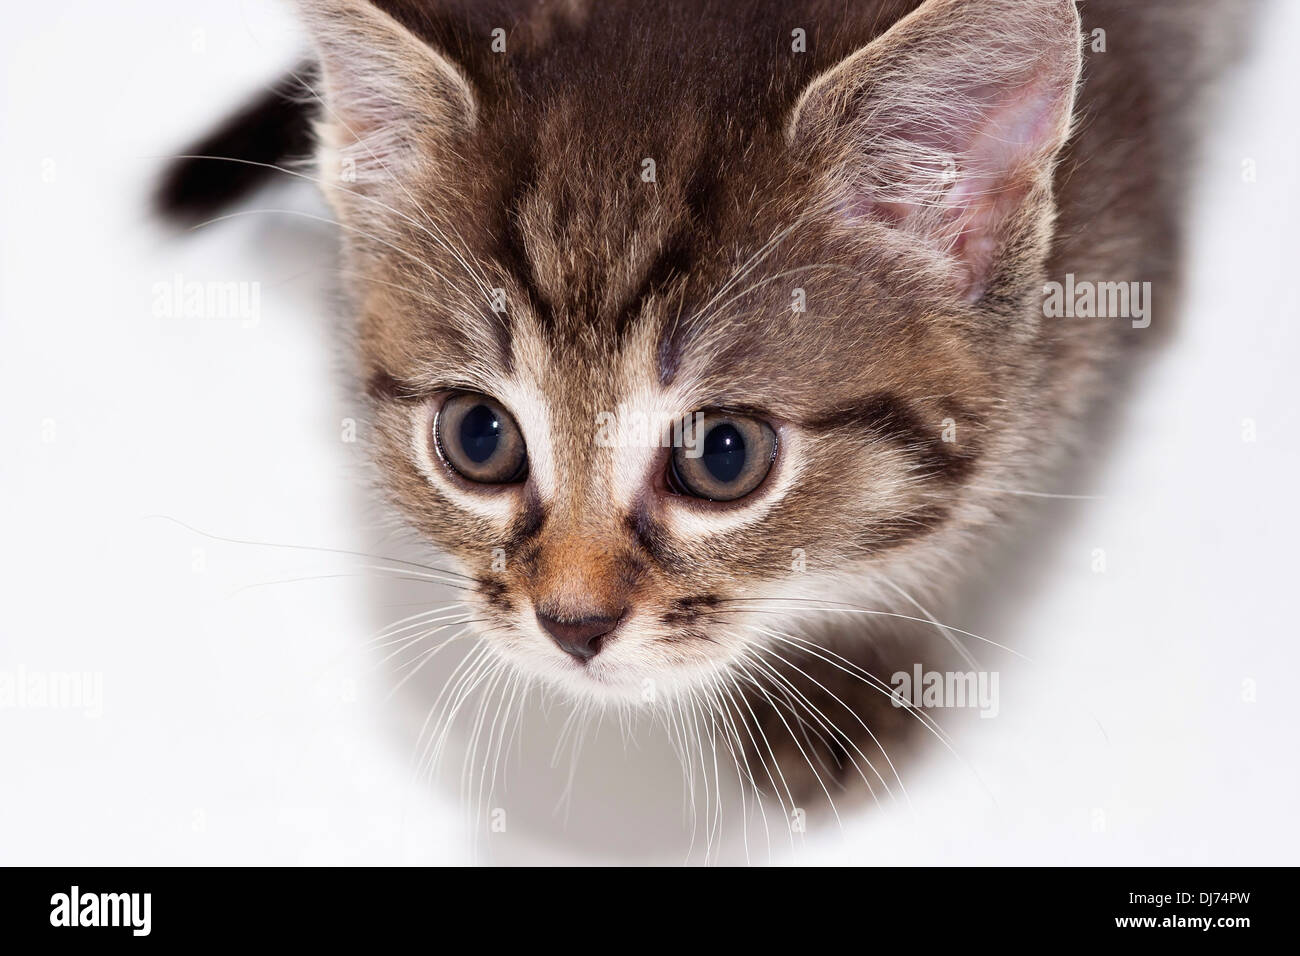 Detail of the small cute kitten - domestic cat Stock Photo